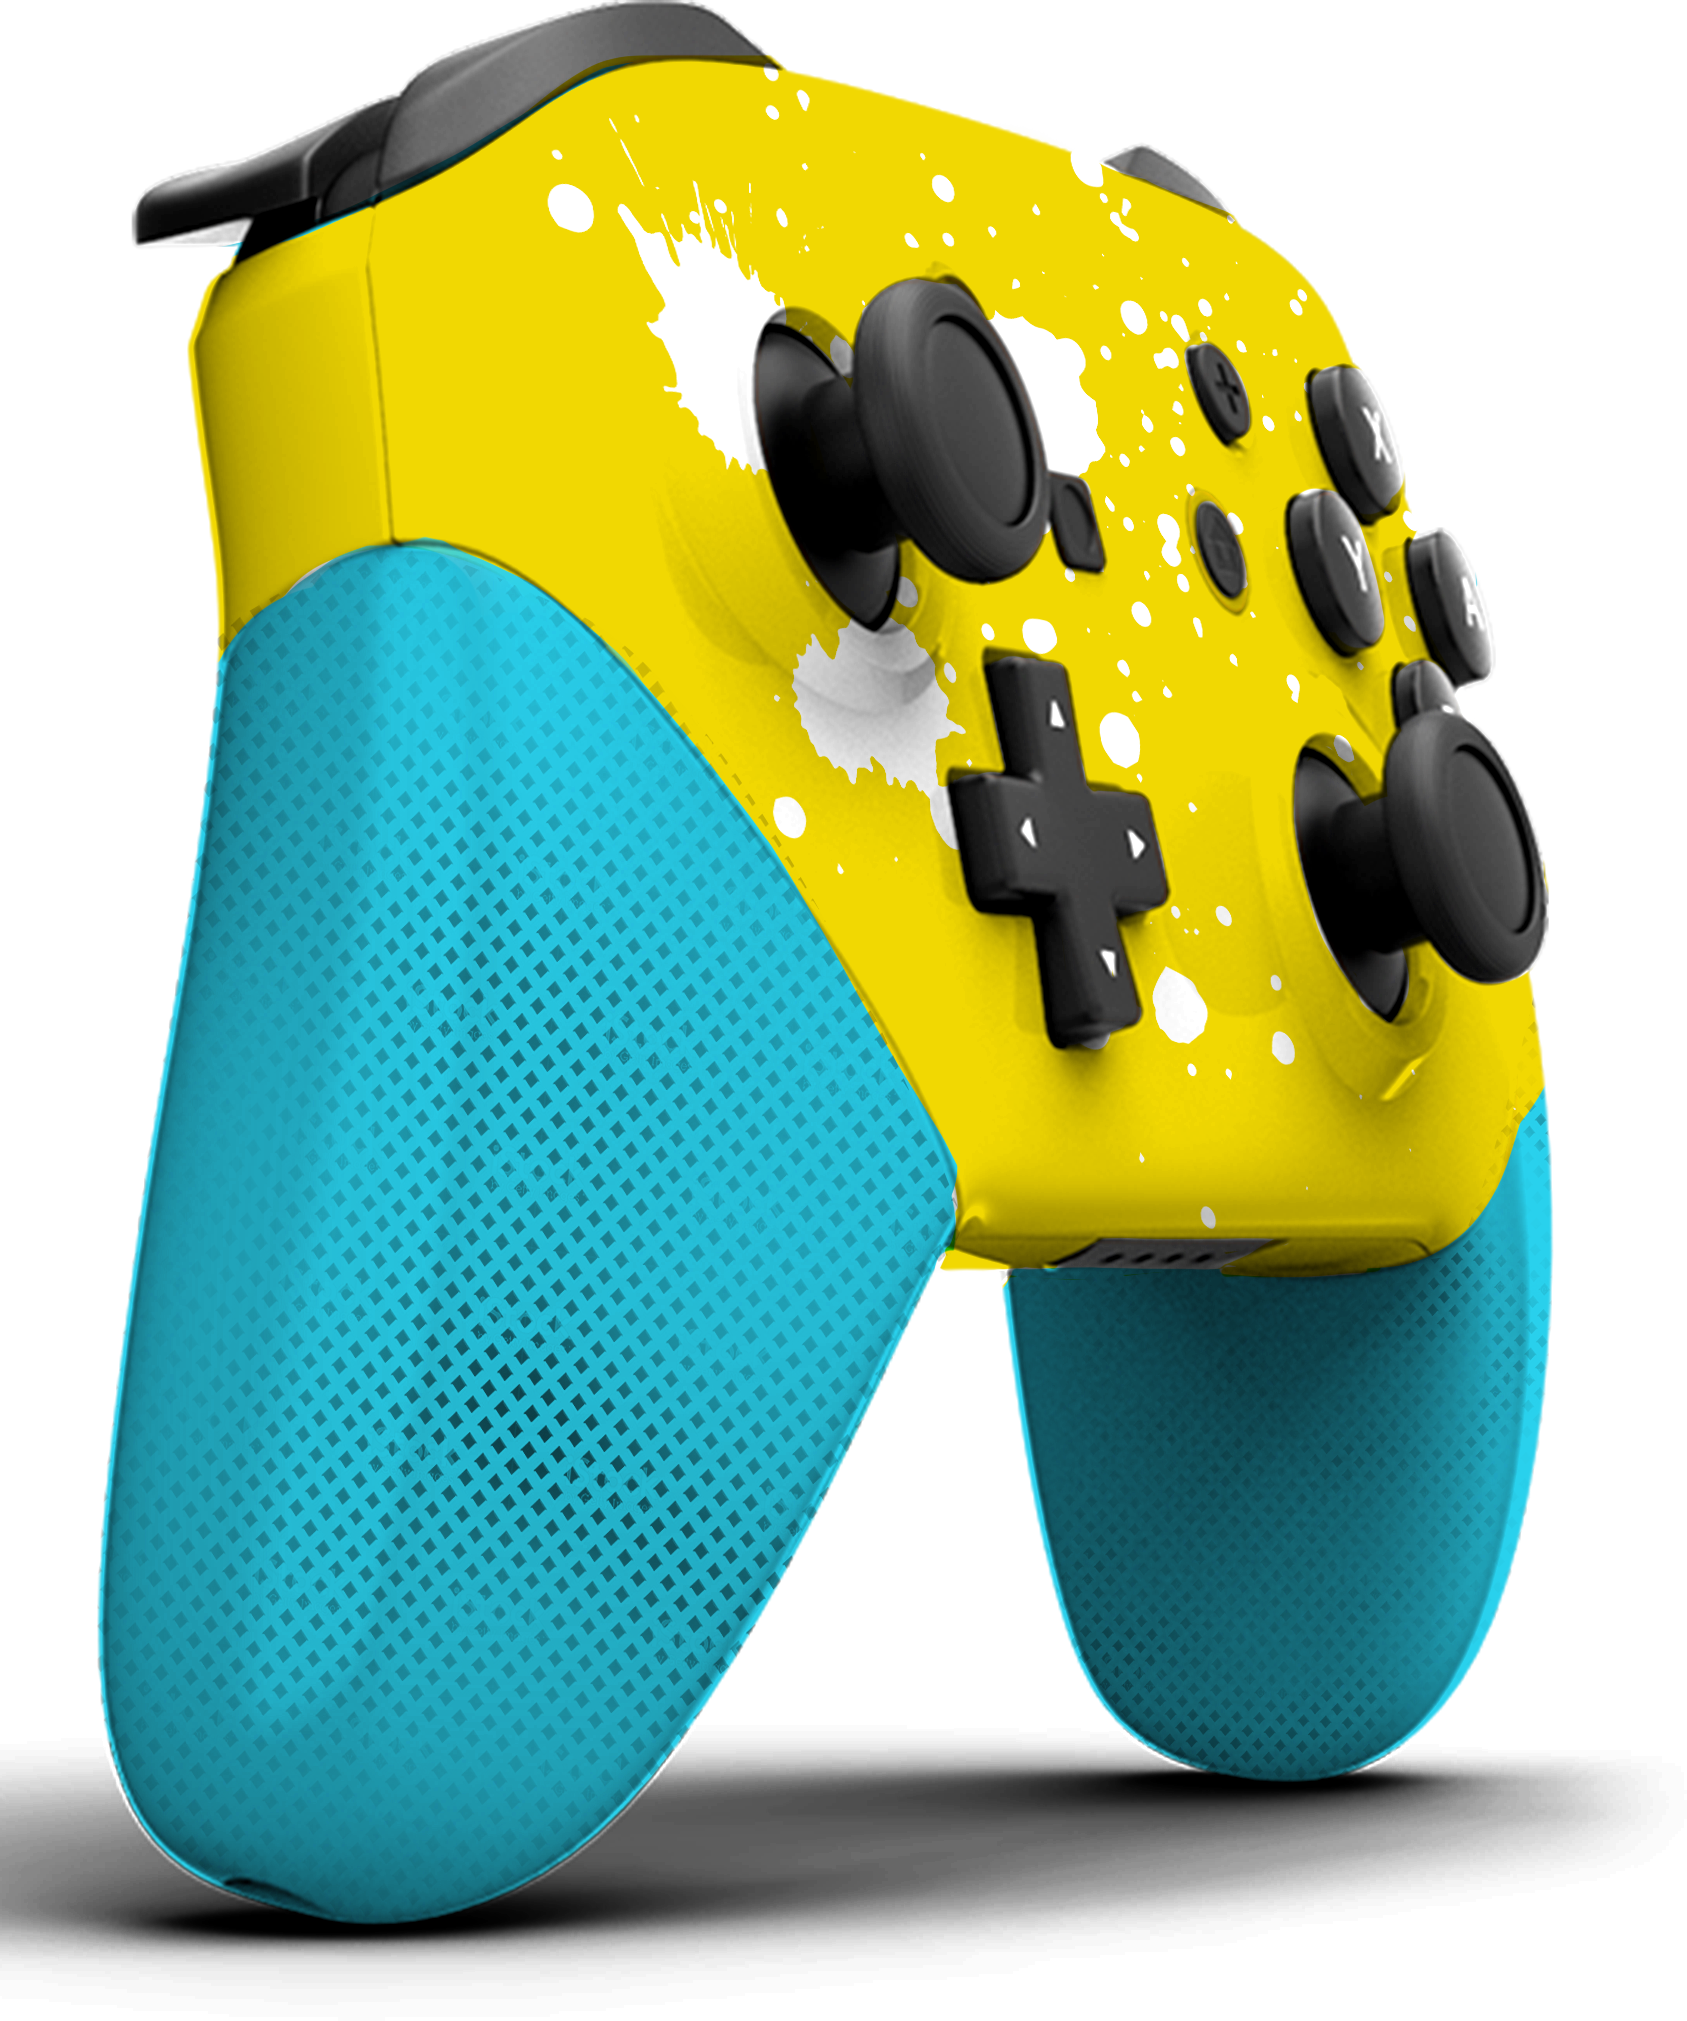 Custom Controller Nintendo Switch Pro - Yellow Build Your Own Teal Blue Grips White Splatter